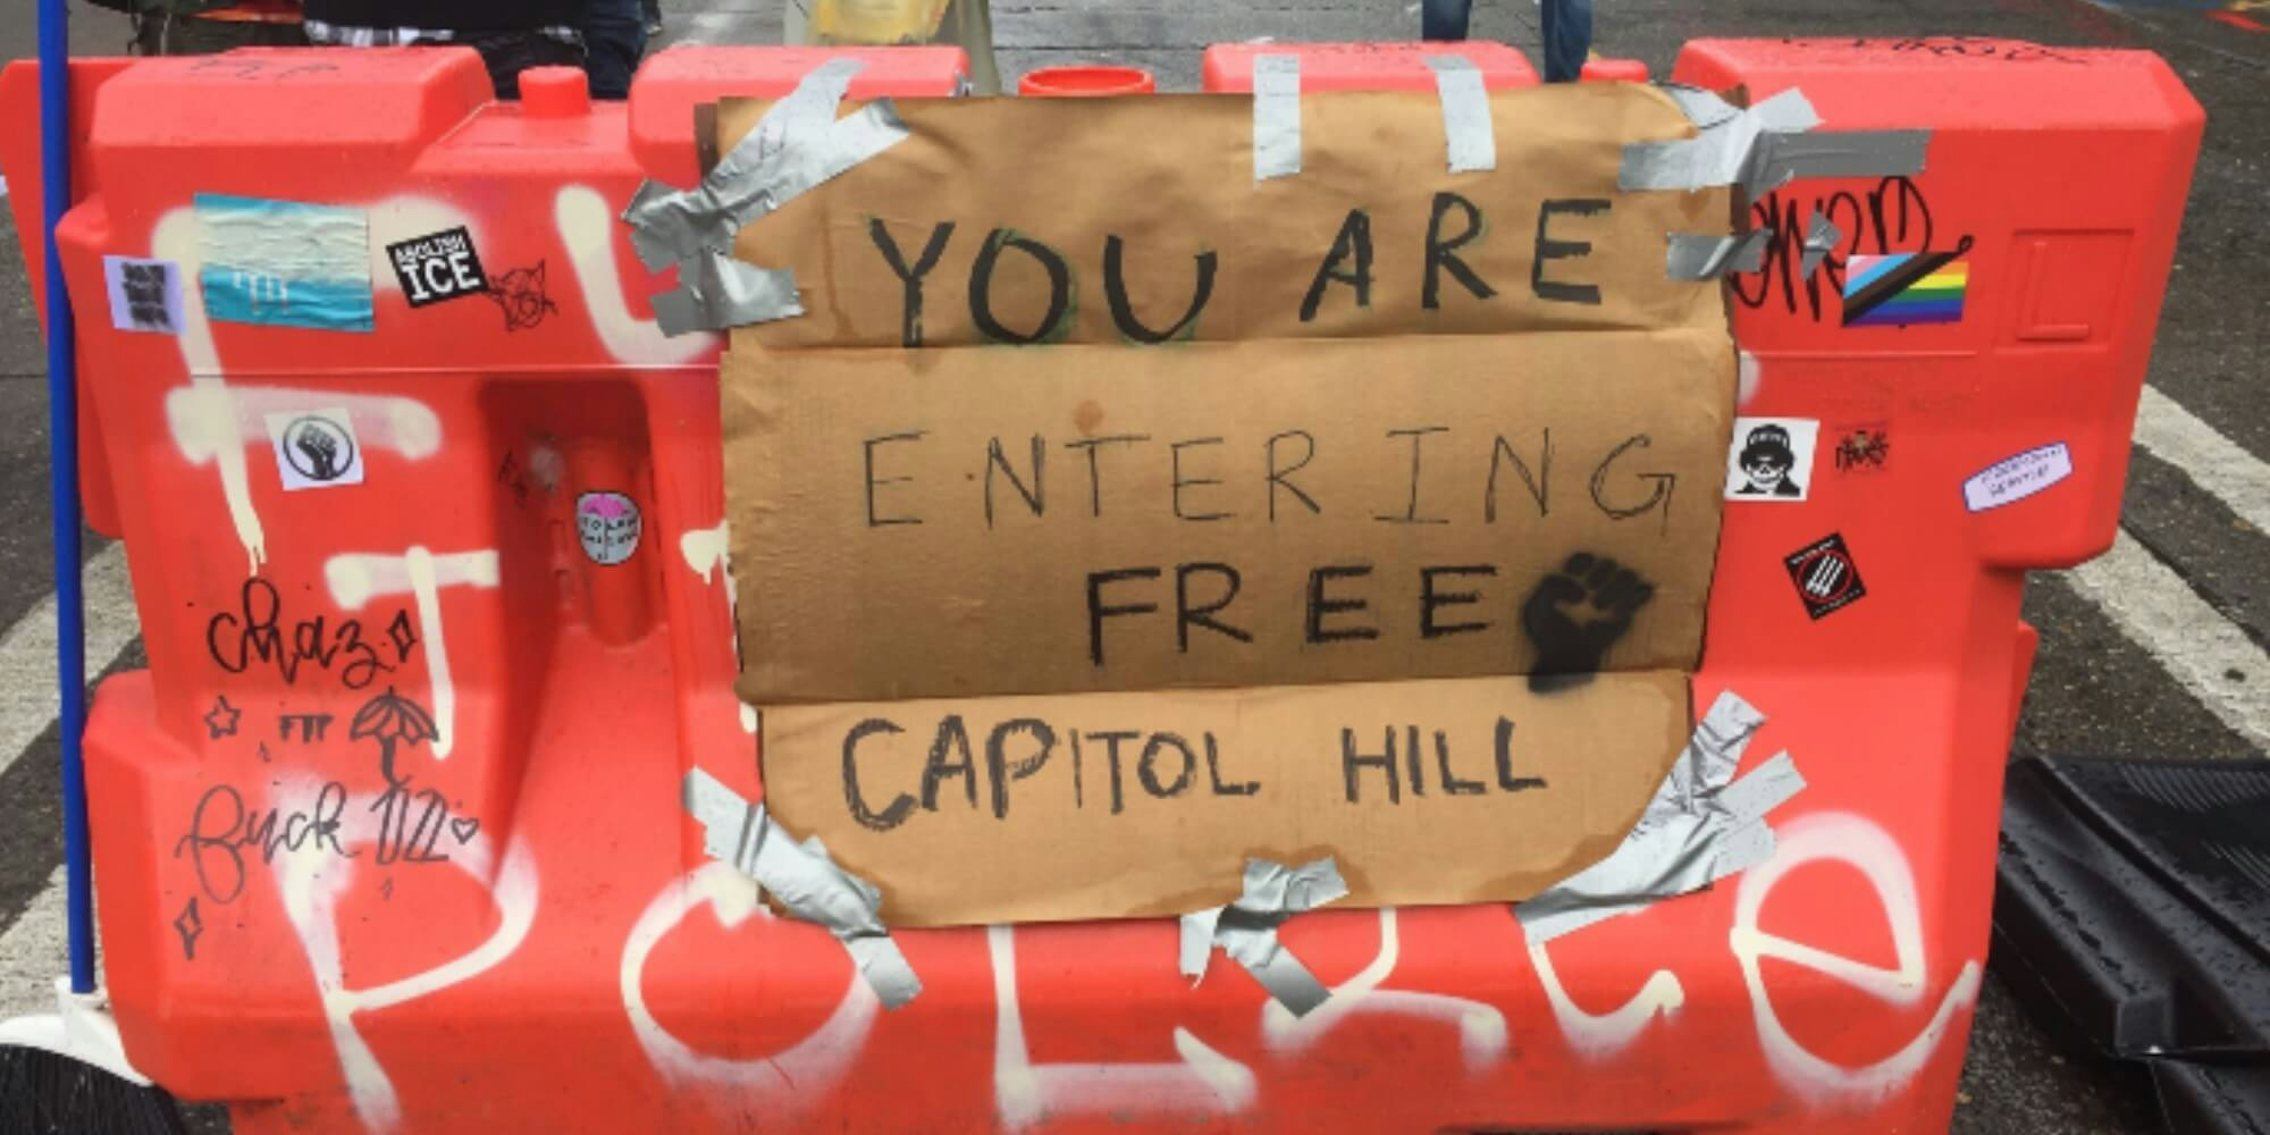 The entrance to Free Capitol Hill in Seattle